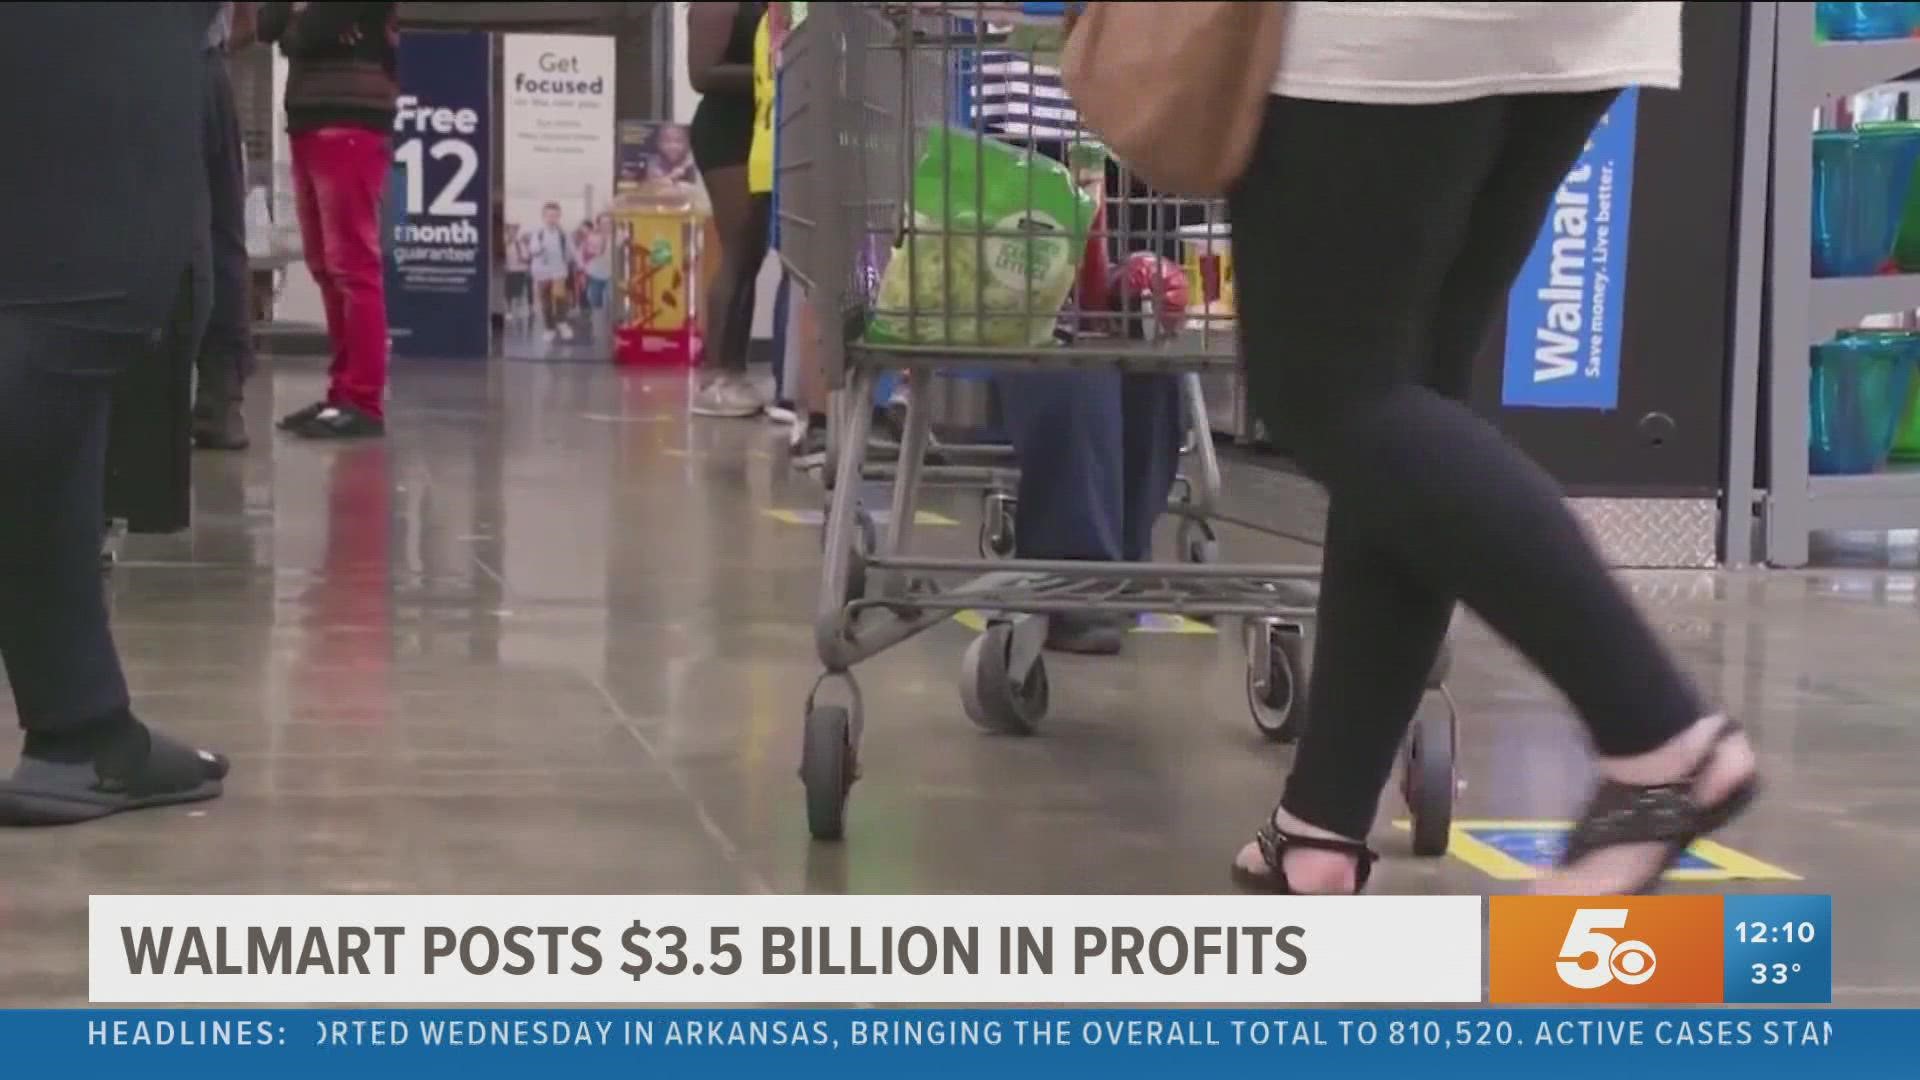 Walmart reported that its quarterly profit reached $3.56 billion, or $1.28 per share.